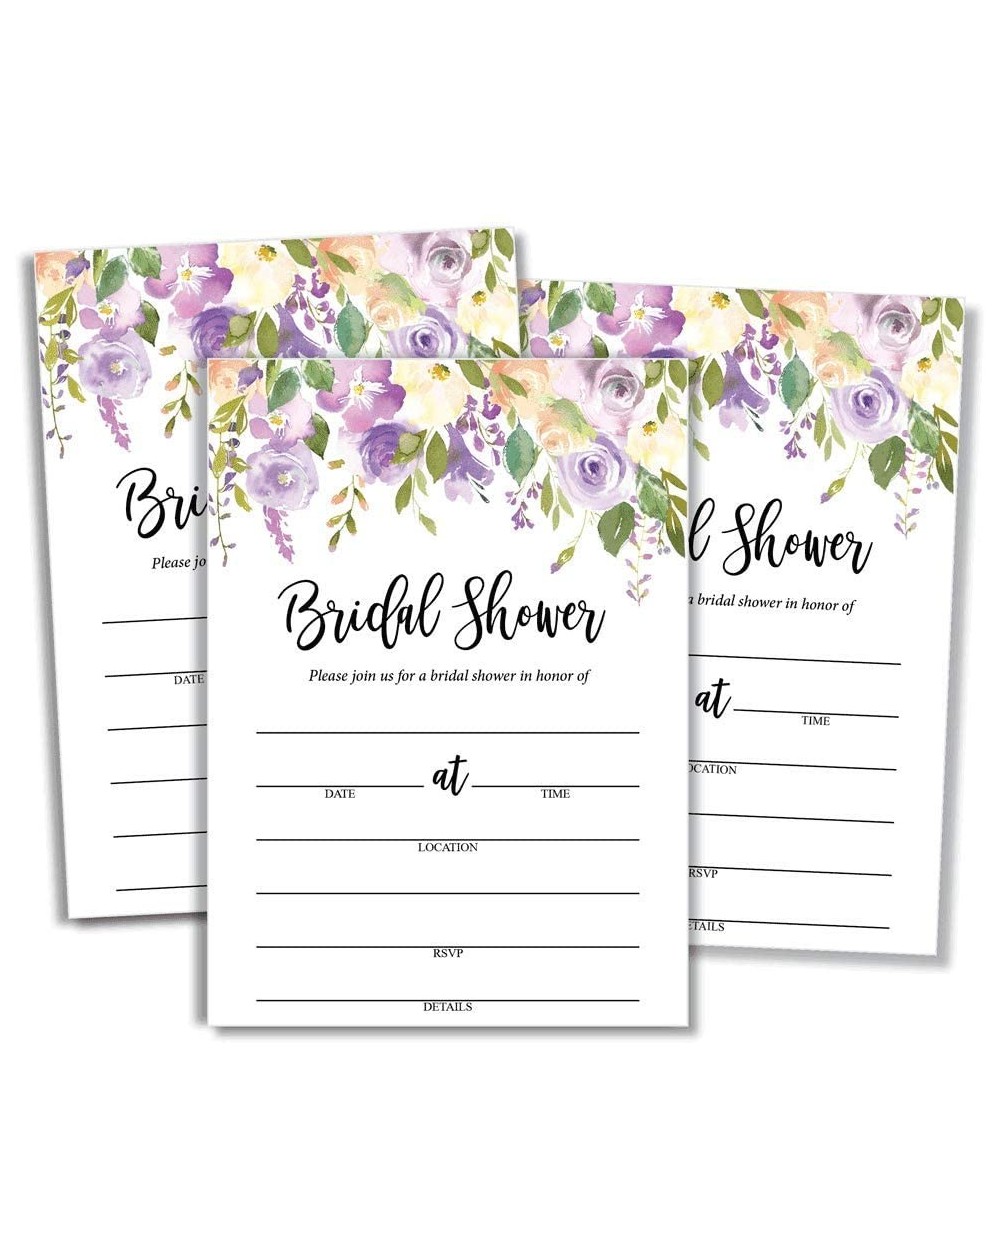 Invitations 50 Purple Floral Bridal Shower Invitations and Envelopes (Large Size 5x7) - (50 Count) - CH196UMHXHI $12.87